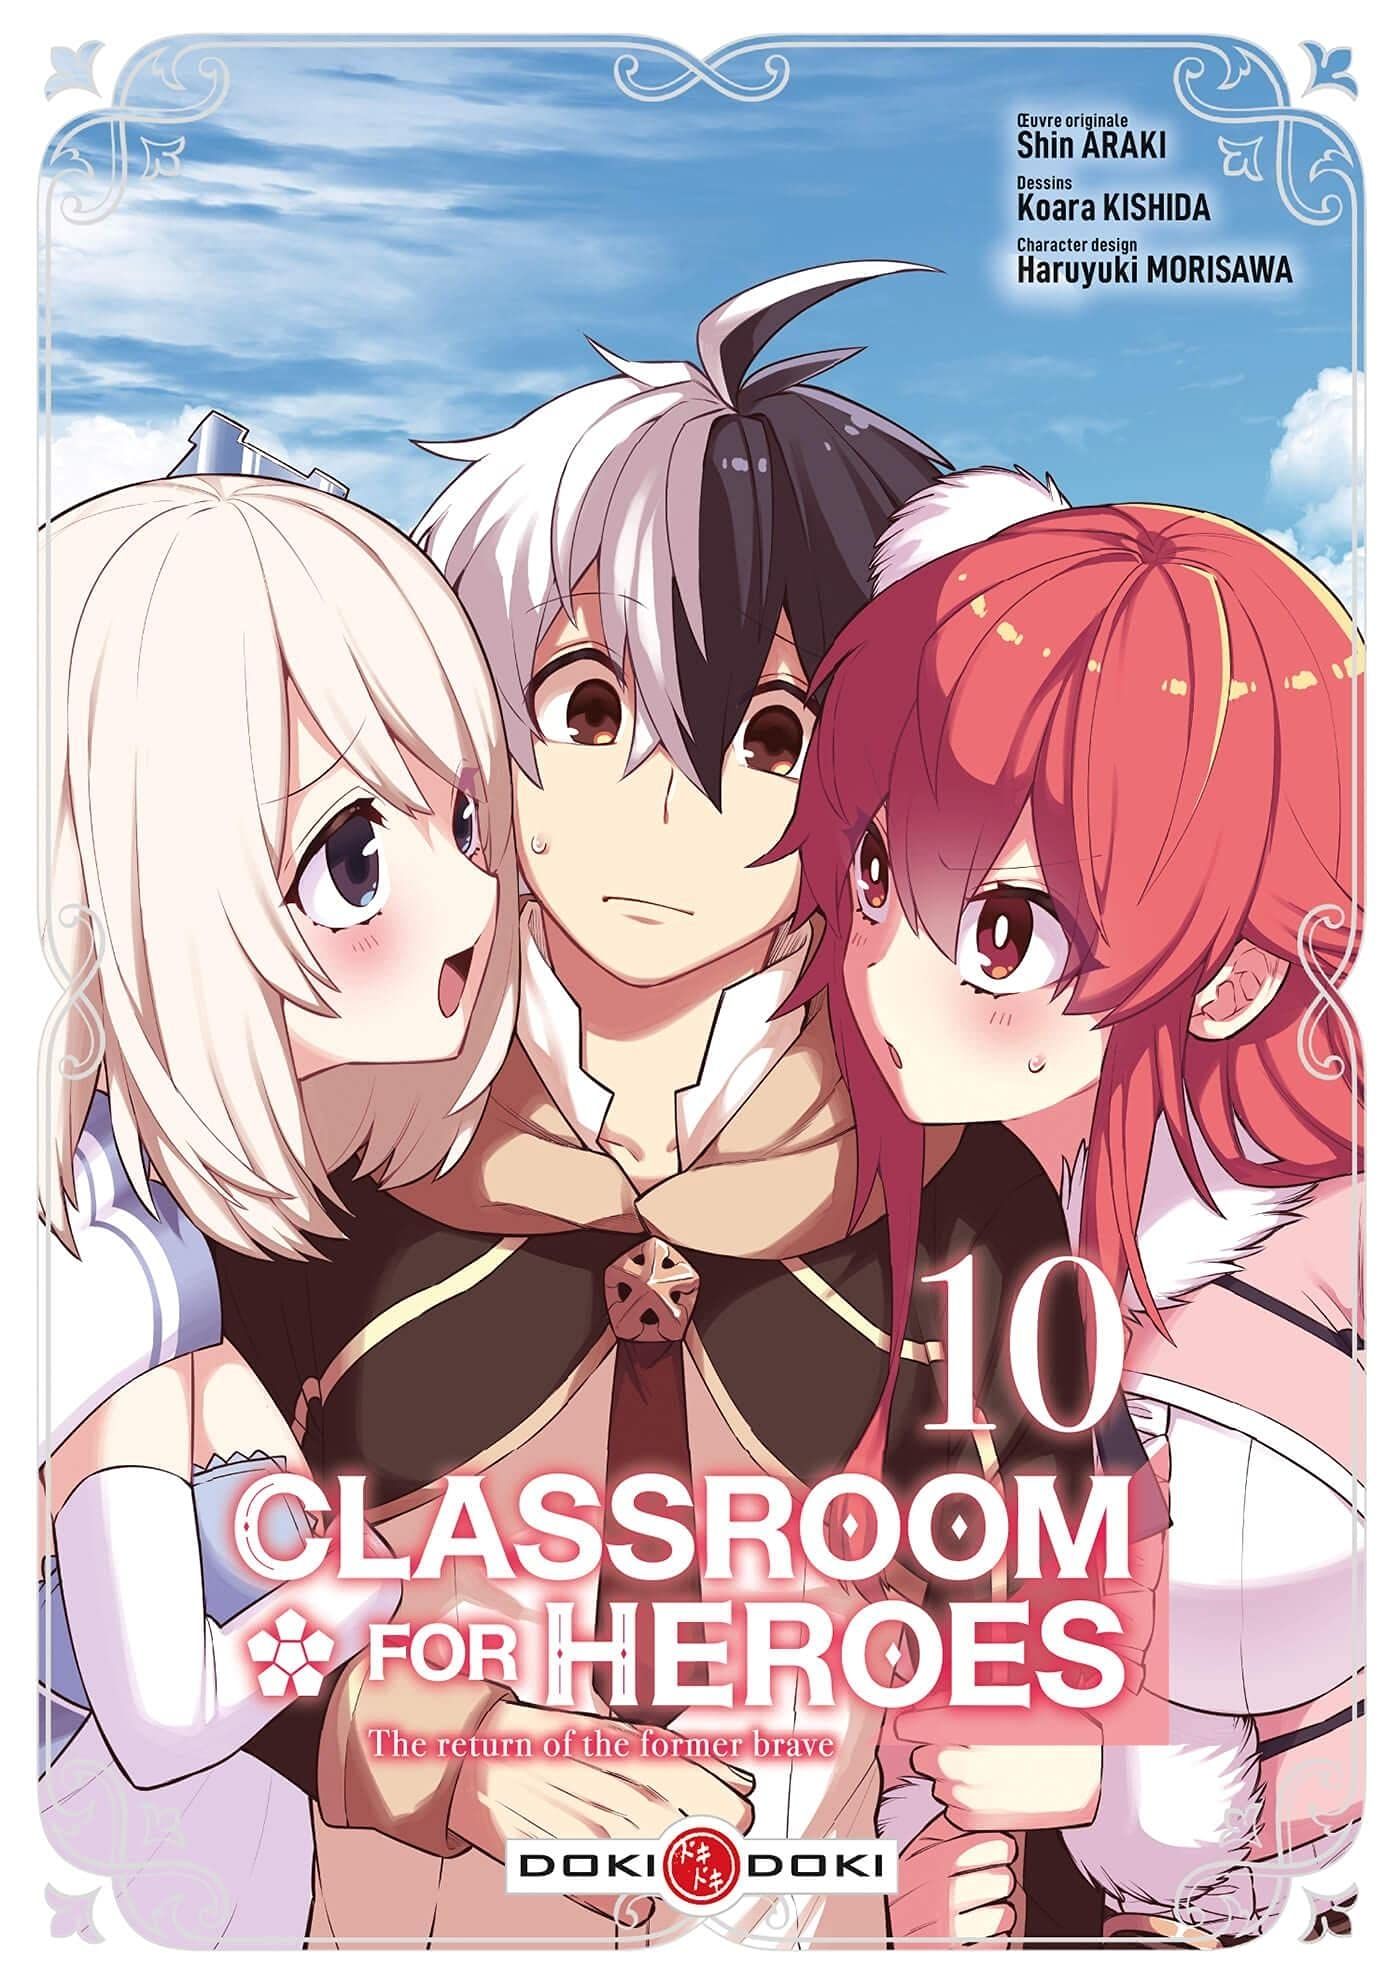 Classroom for heroes Vol.10